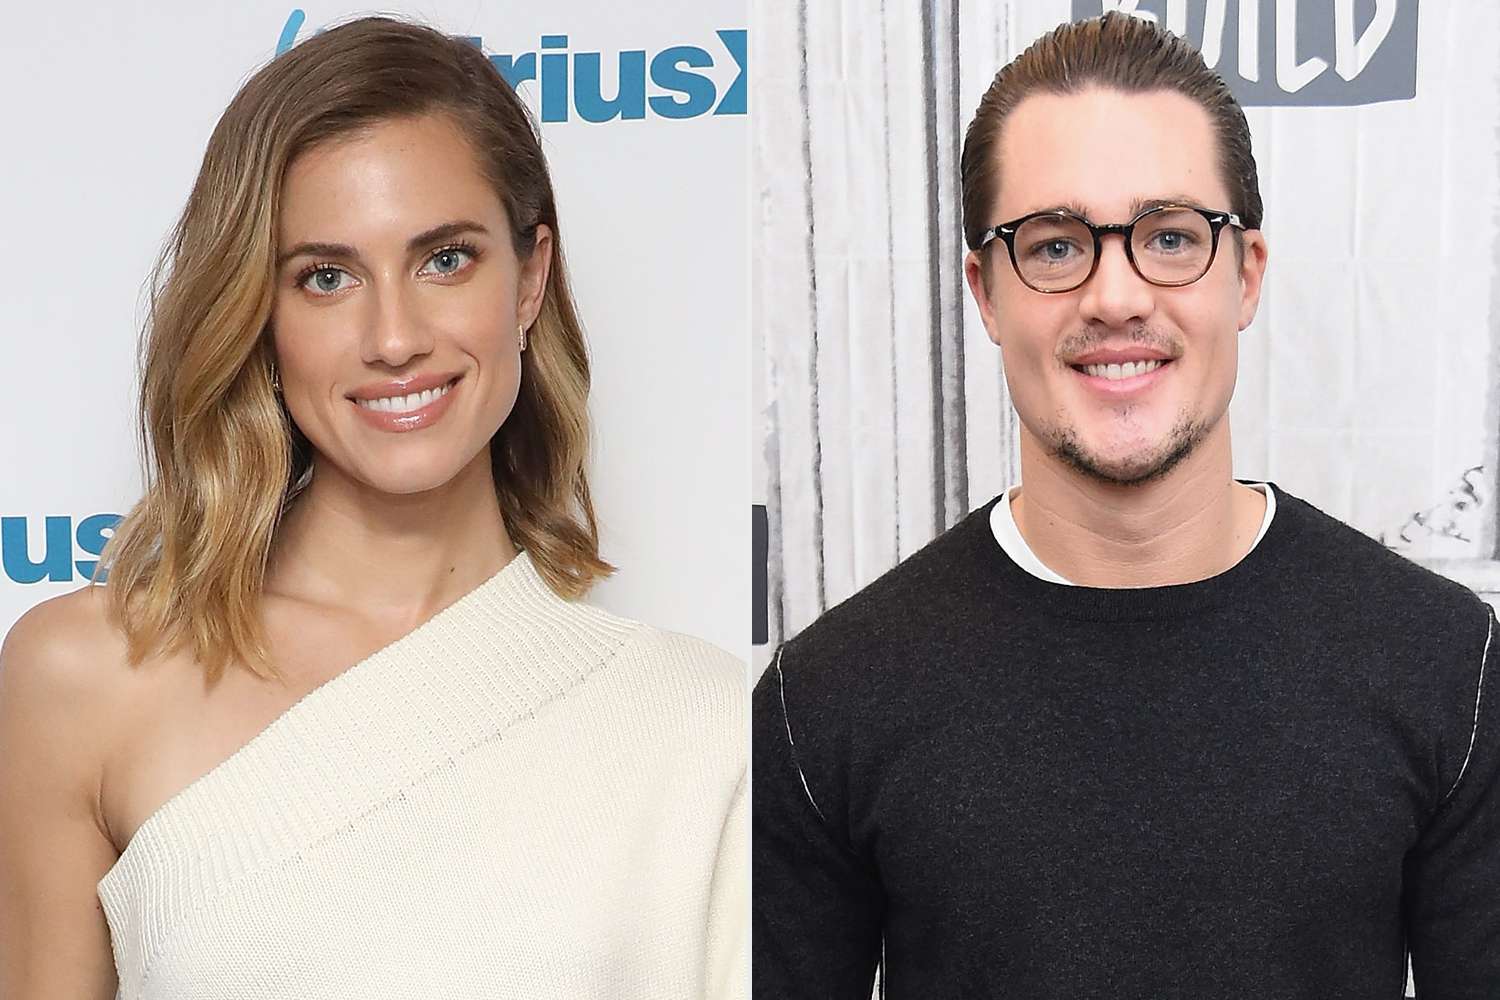 NEW YORK, NY - MAY 21: Allison Williams visits the SiriusXM Studios on May 21, 2019 in New York City. (Photo by Taylor Hill/Getty Images); NEW YORK, NEW YORK - NOVEMBER 26: Actor Alexander Dreymon visits Build Series to discuss the BBC America series 'The Last Kingdom' at Build Studio on November 26, 2018 in New York City. (Photo by Gary Gershoff/Getty Images)